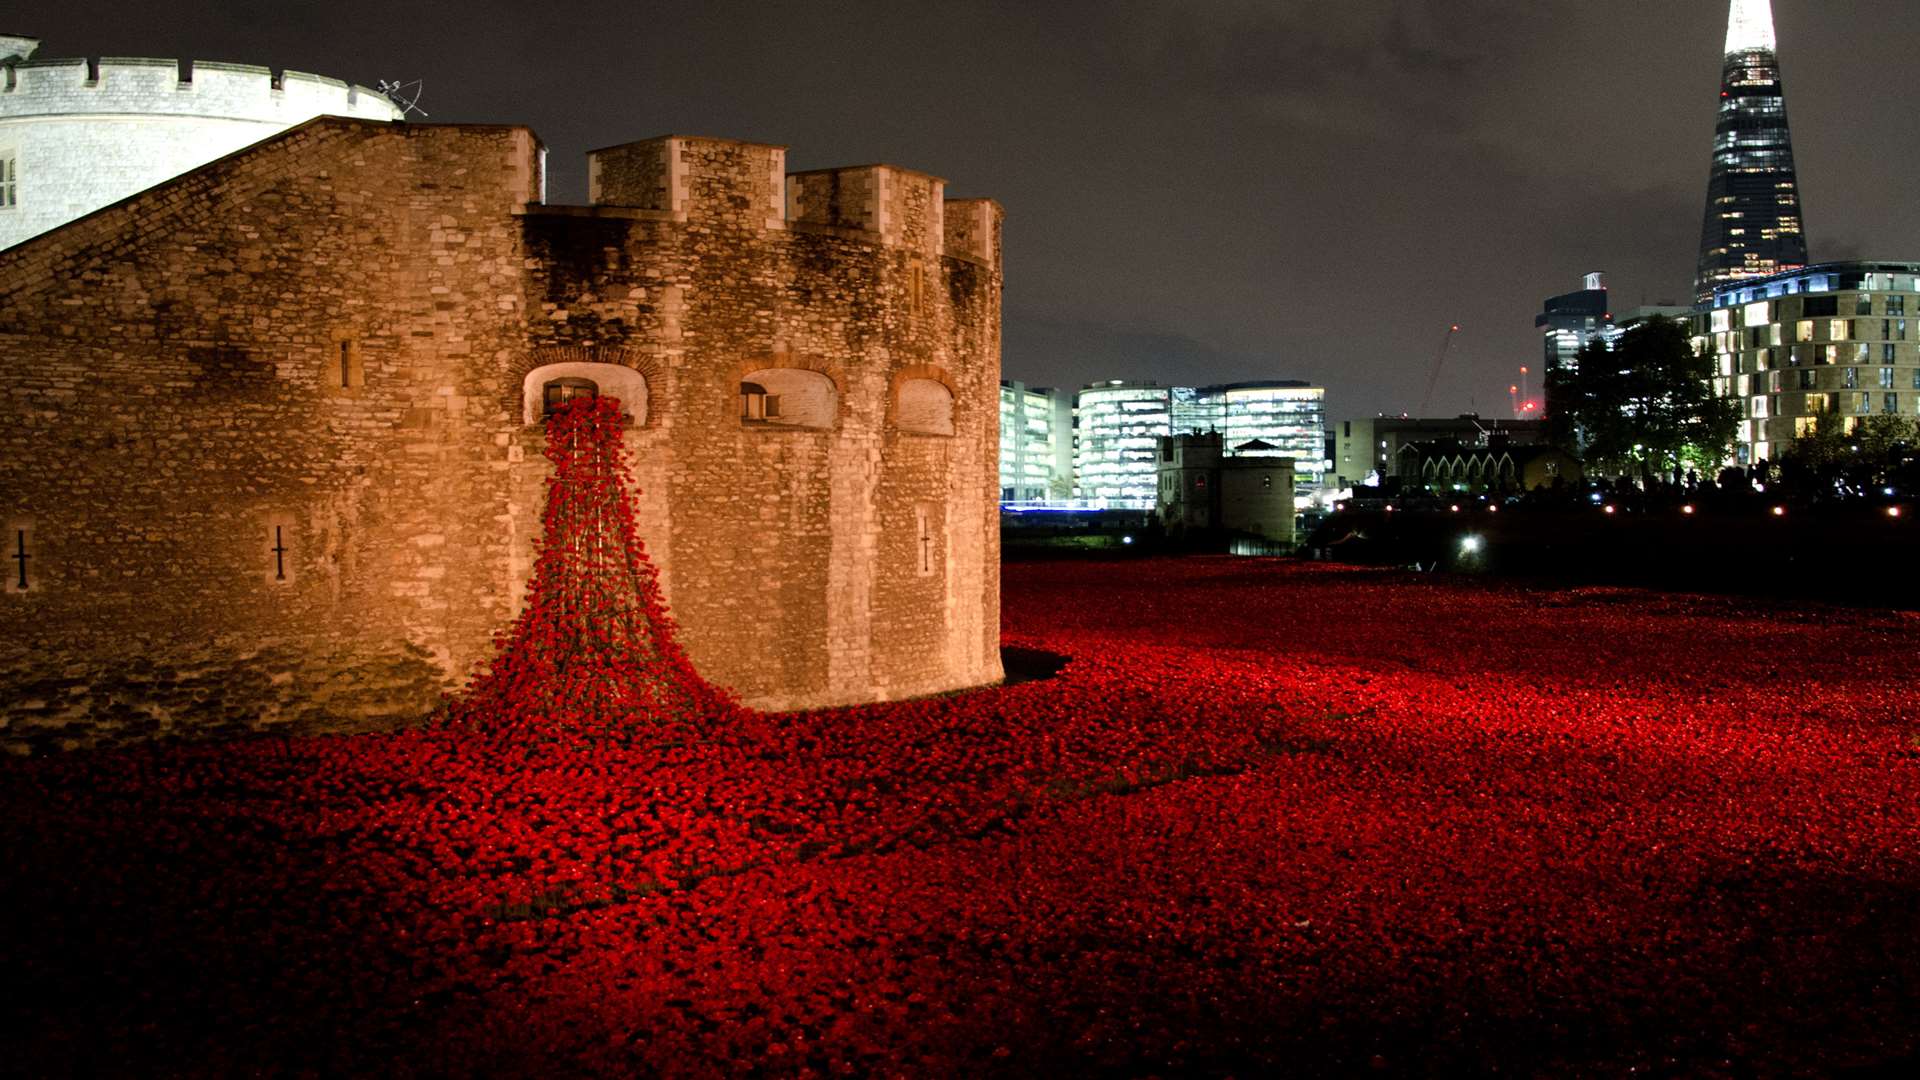 The brilliant poppy display at the Tower of London